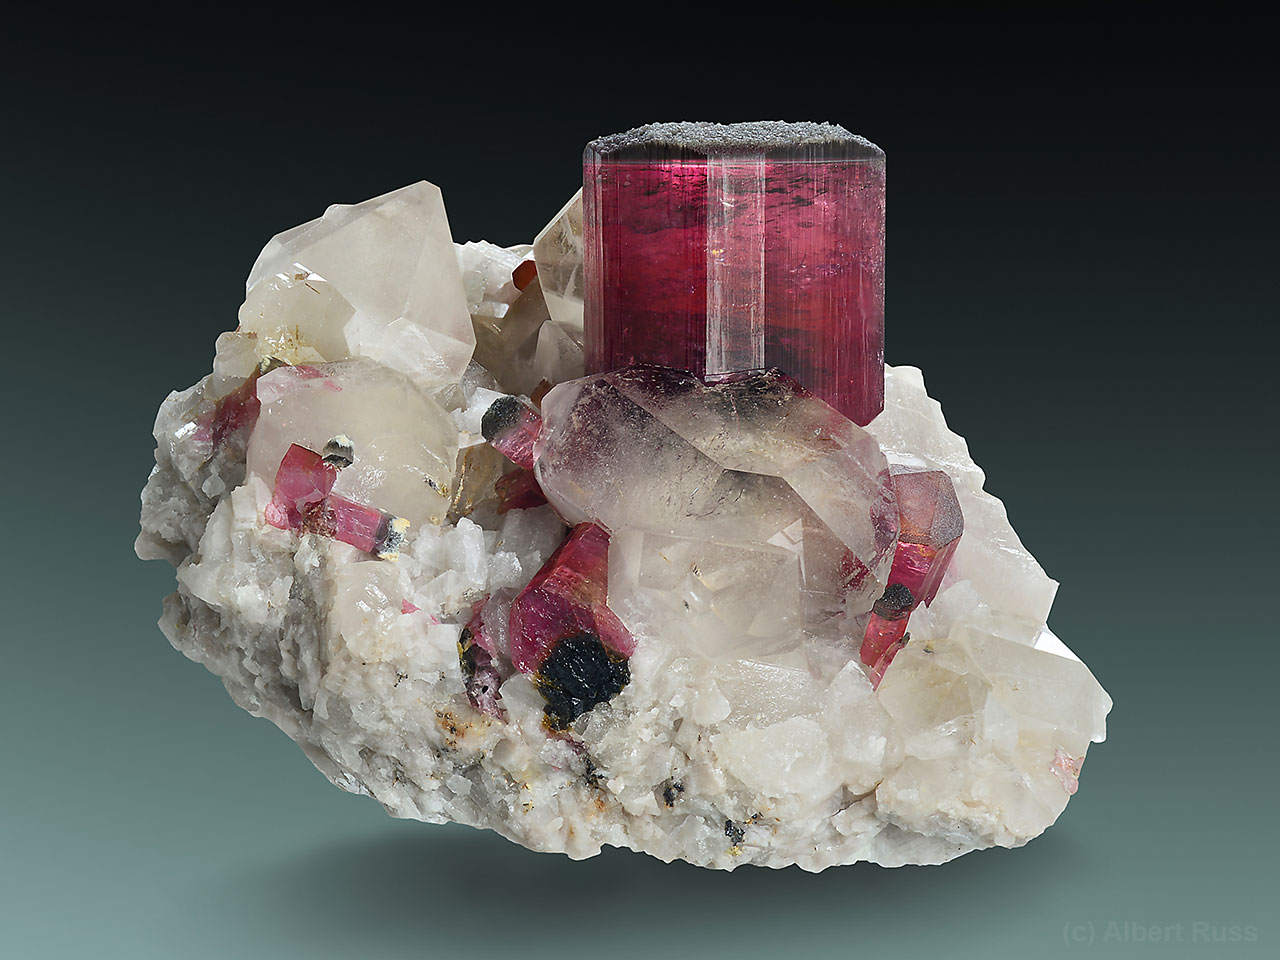 Unusual red tourmaline with black crystal terminations from Mogok Township, Pyin-Oo-Lwin District, Mandalay, Myanmar.